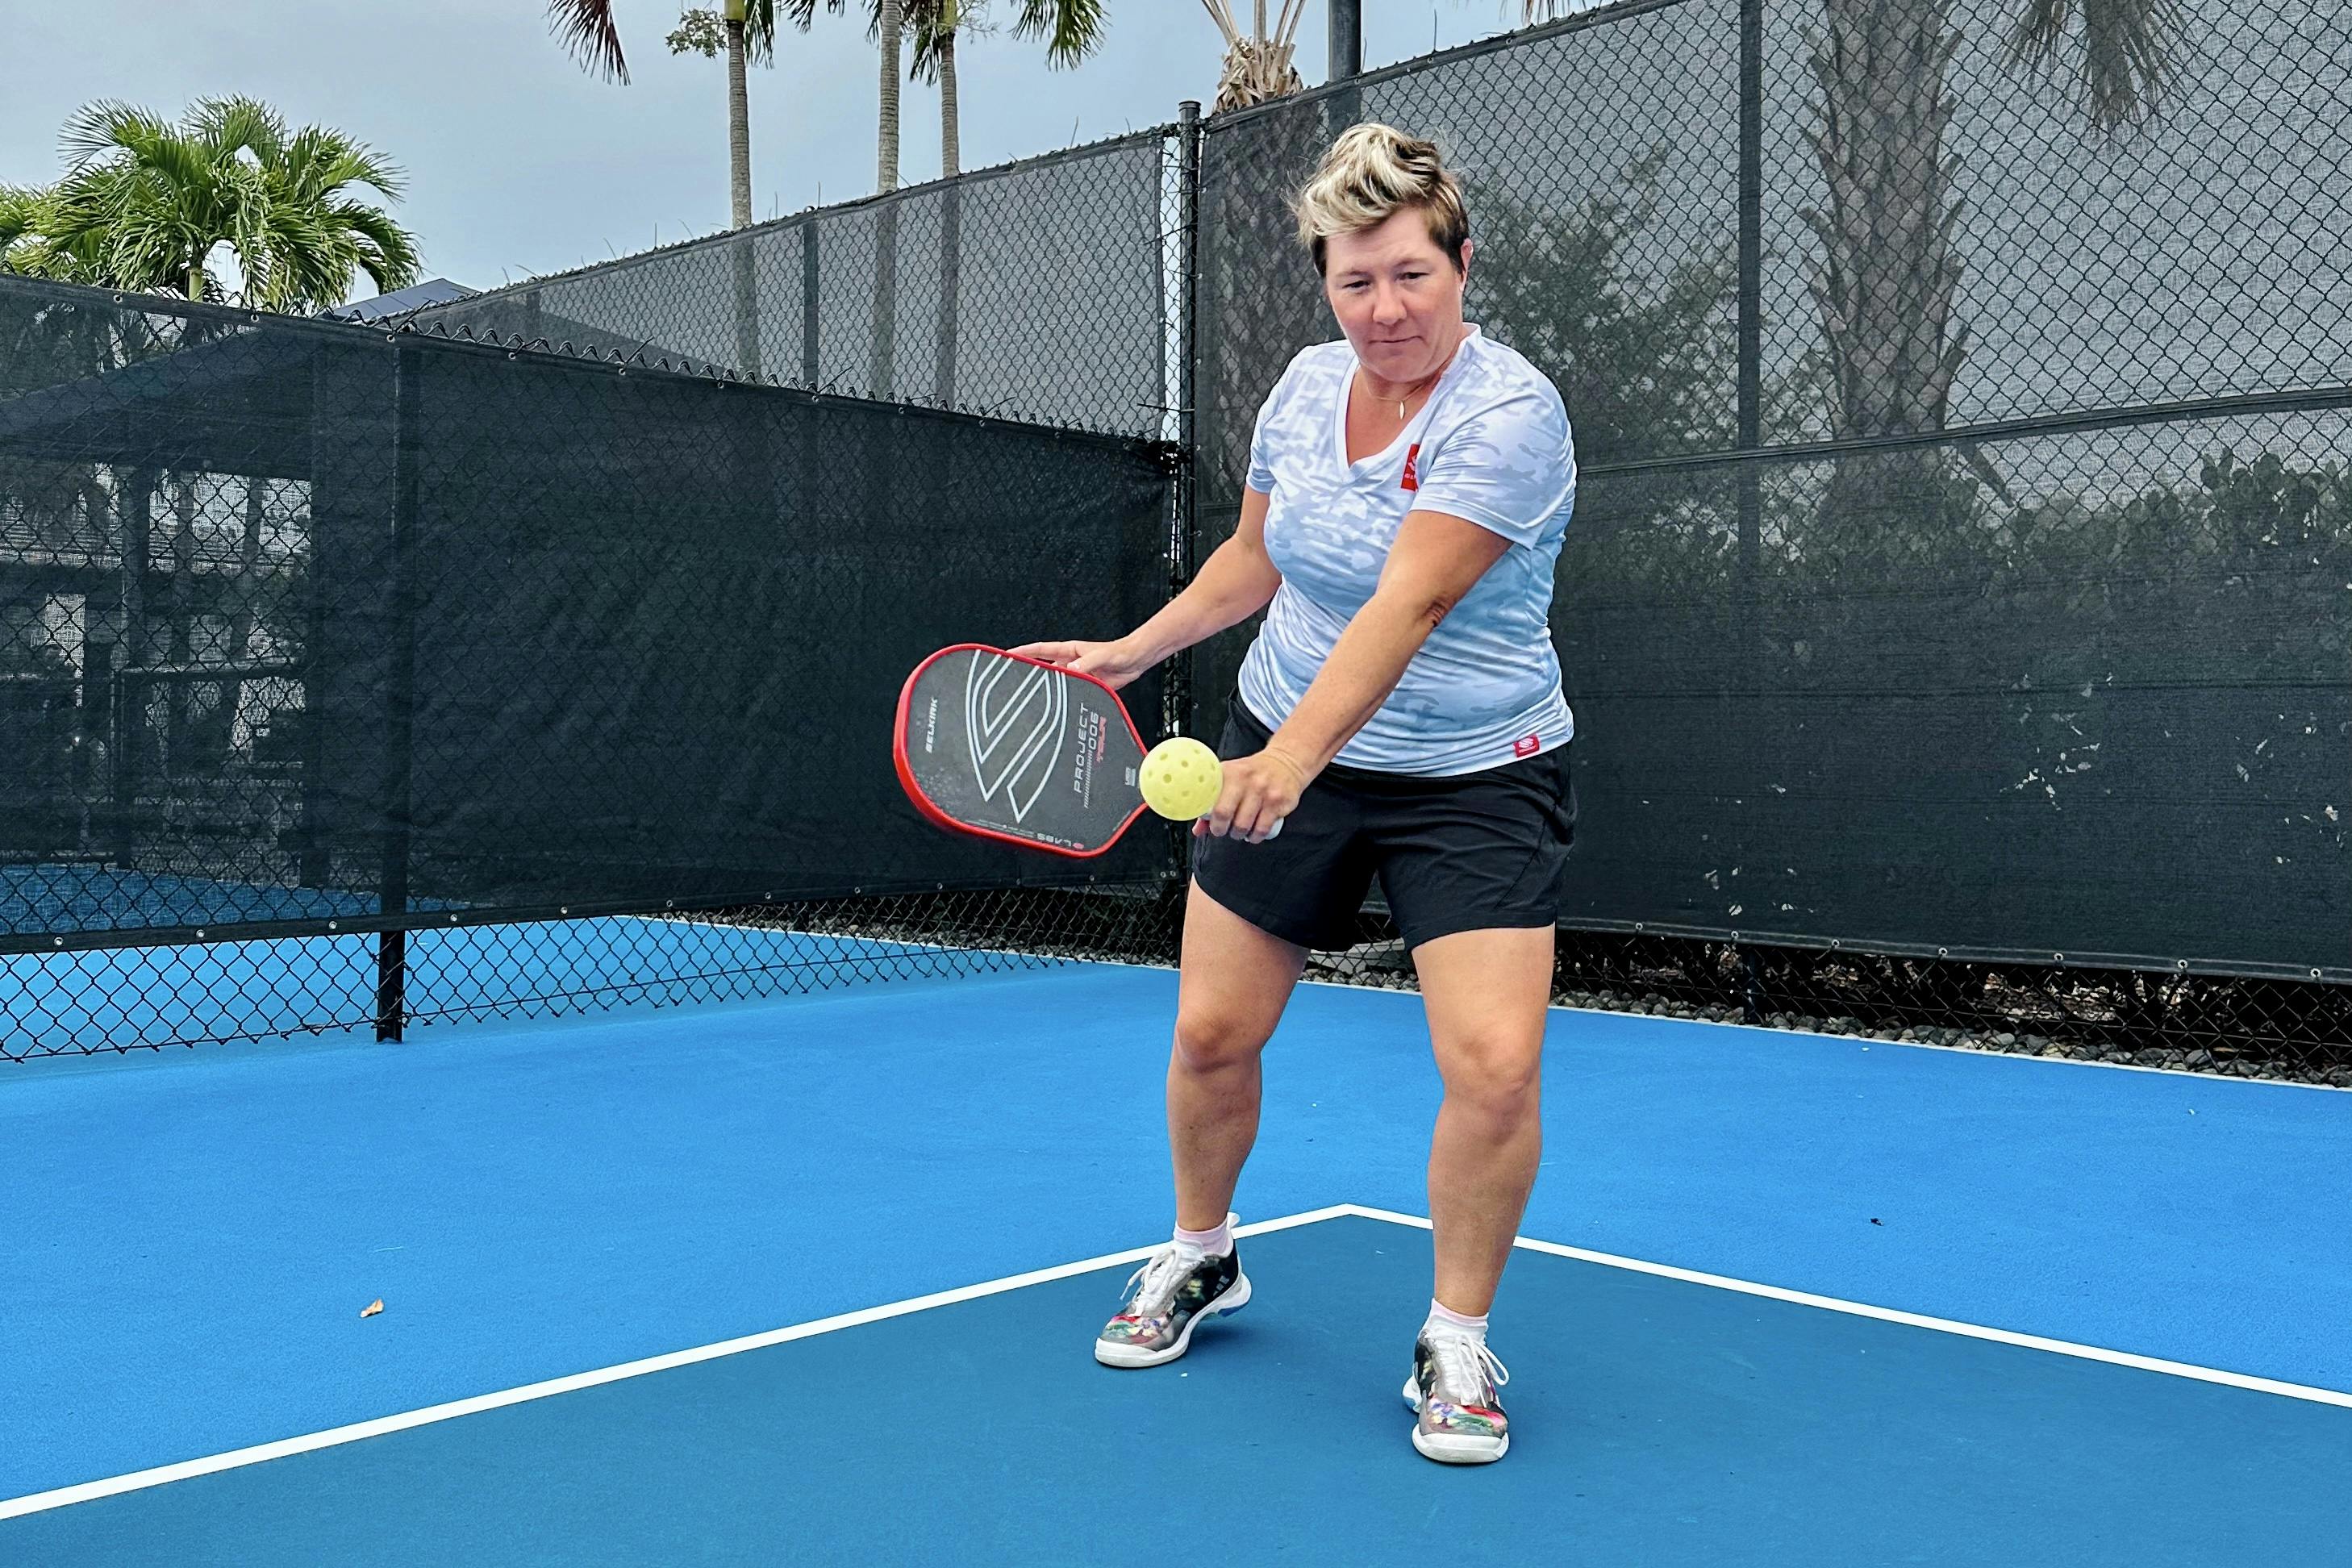 Find a Way to Pursue Your Passion—Pickleball or Otherwise